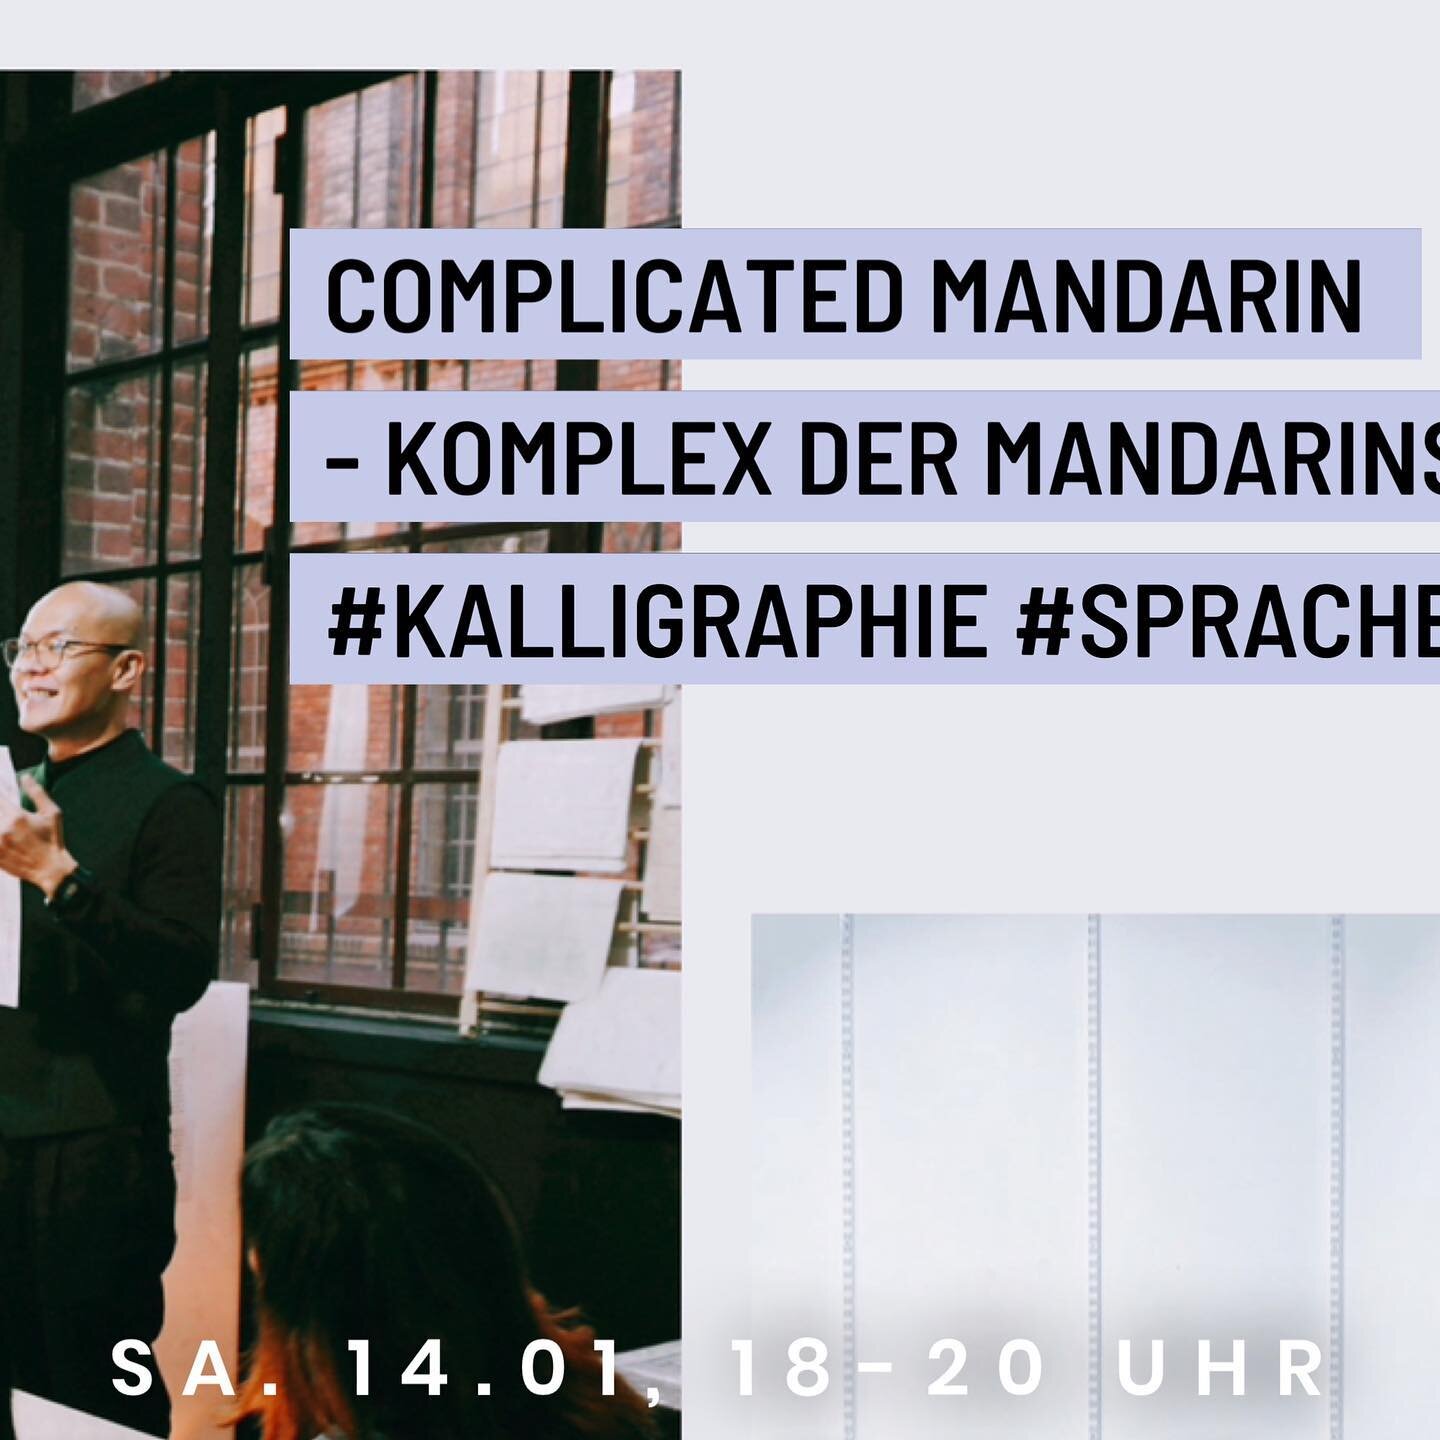 This Saturday, our residency artists Po-Fu Wu and Yuyen Lin-Woywod (COMPLICATED MANDARIN - KOMPLEX DER MANDARINSCHRIFT) and Lex Shcherbakov (ALLOWING SPACE) will present their work during the residency. You are all warmly invited. ✨

🏠 Location: Spa